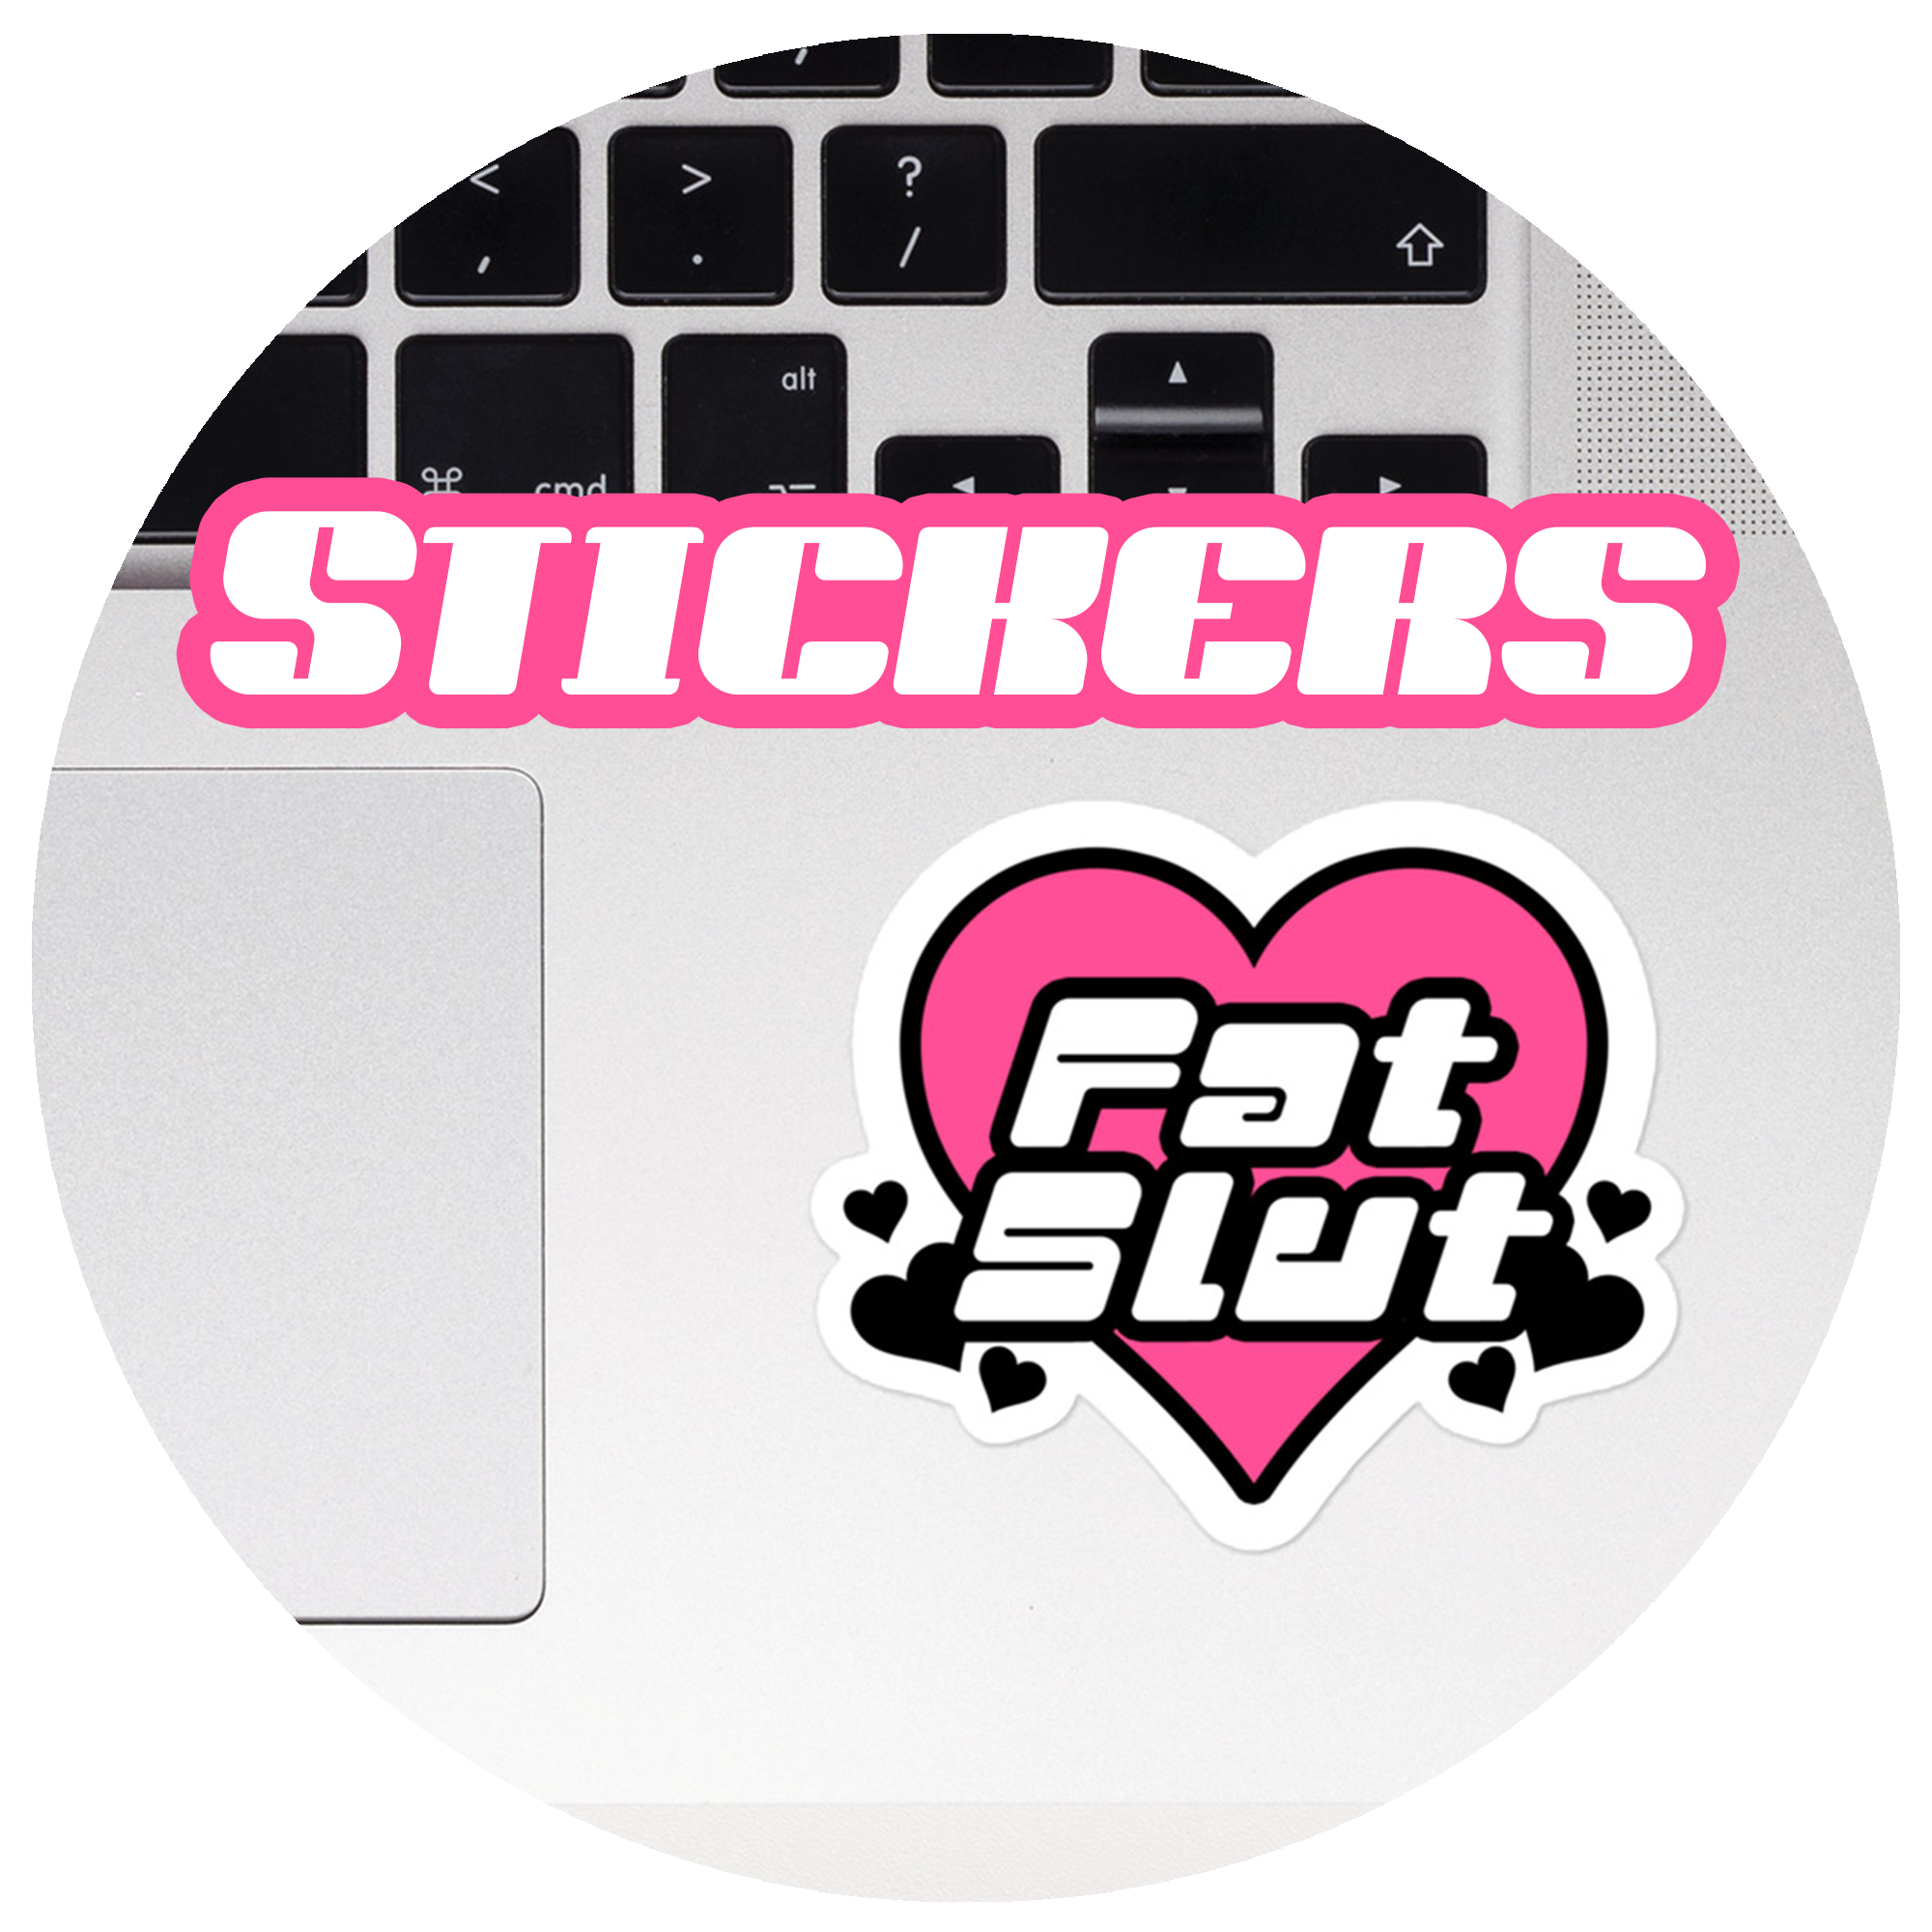 Stickers. Click through to shop the sticker collection.